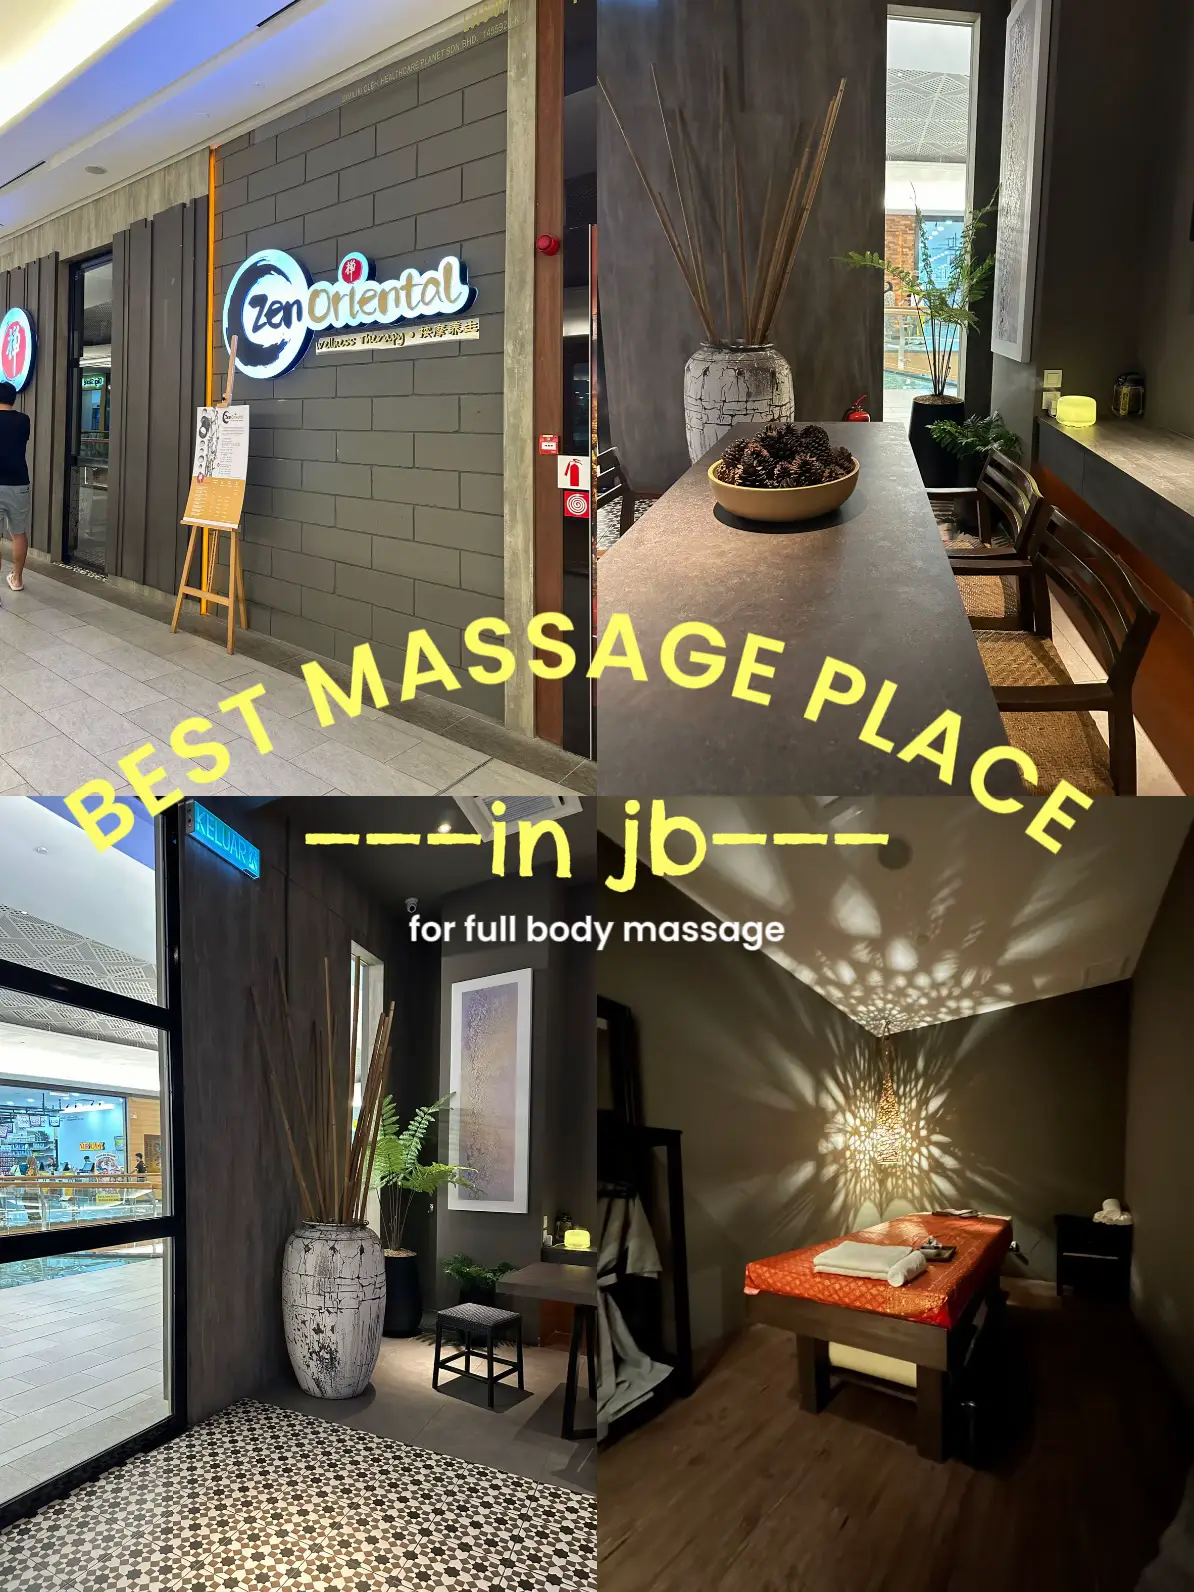 ✨⭐️ favourite massage place in jb's images